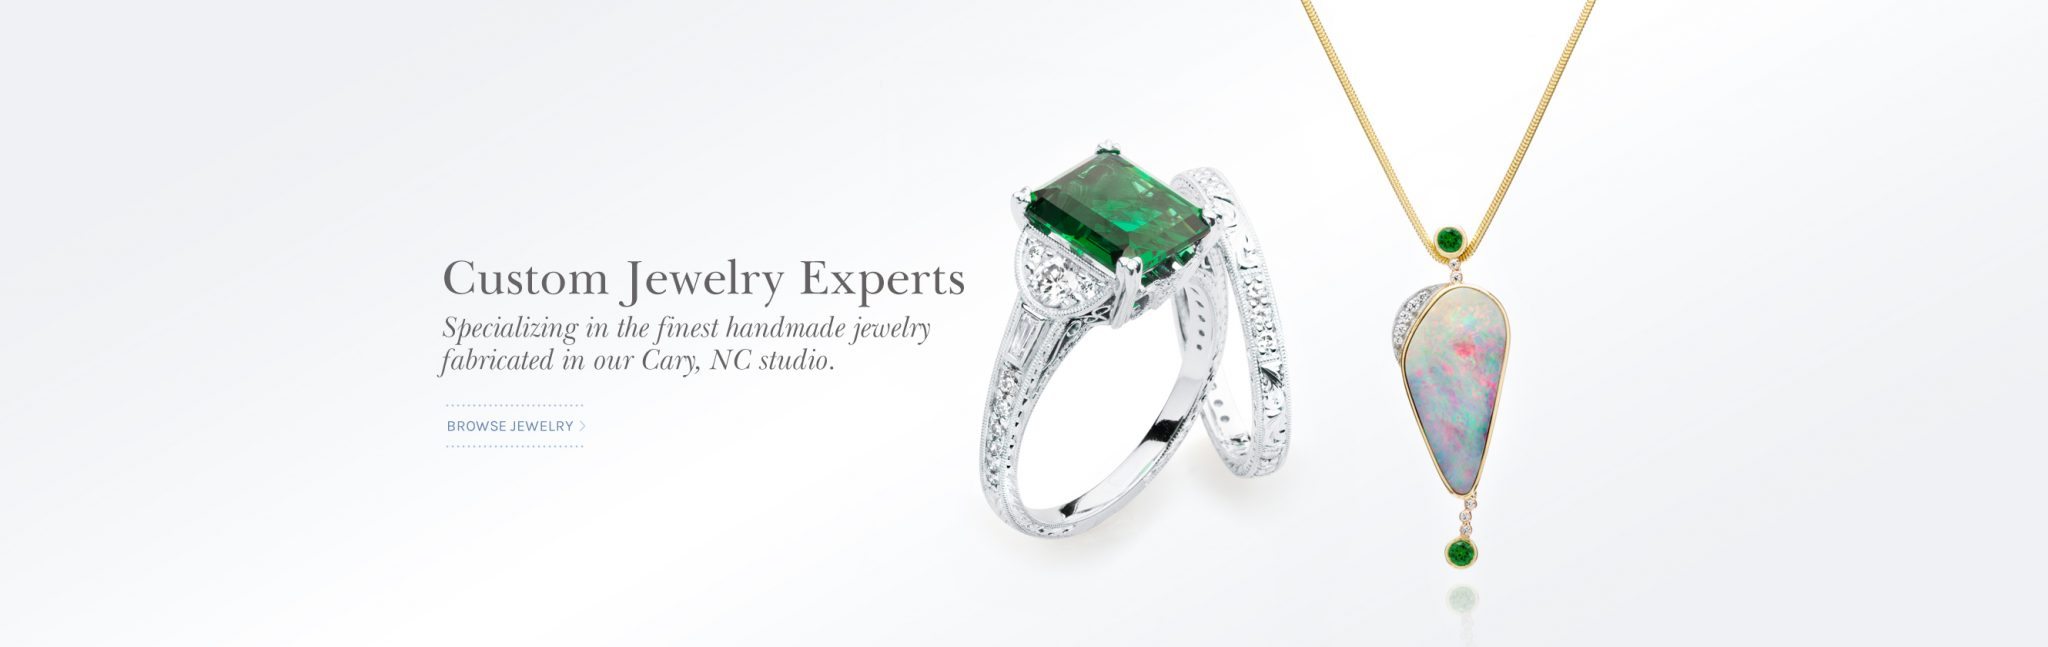 Custom Jewelry Raleigh | Engagement Rings | JM Edwards Jewelers Cary NC